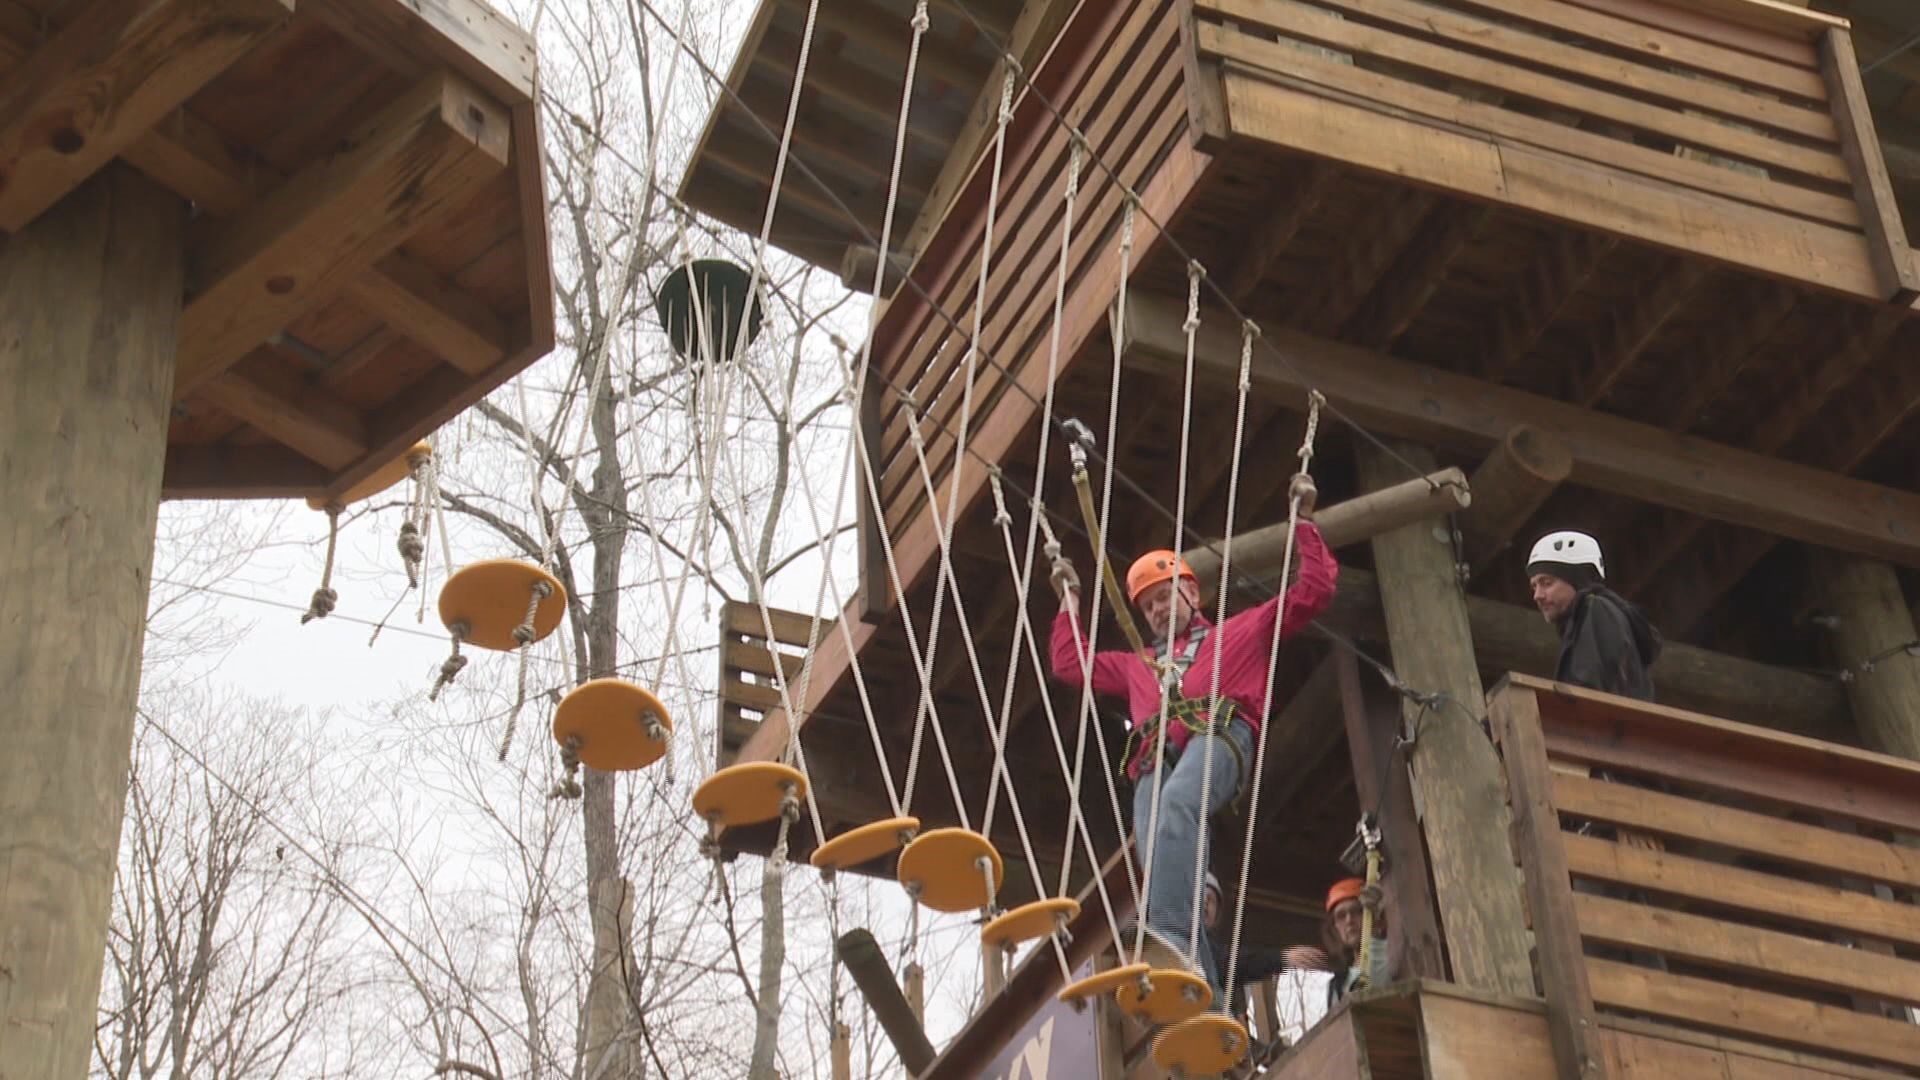 WFMY’s Eric Chilton takes a closer look at the Skywild treetop adventure park at the Greensboro Science Center.